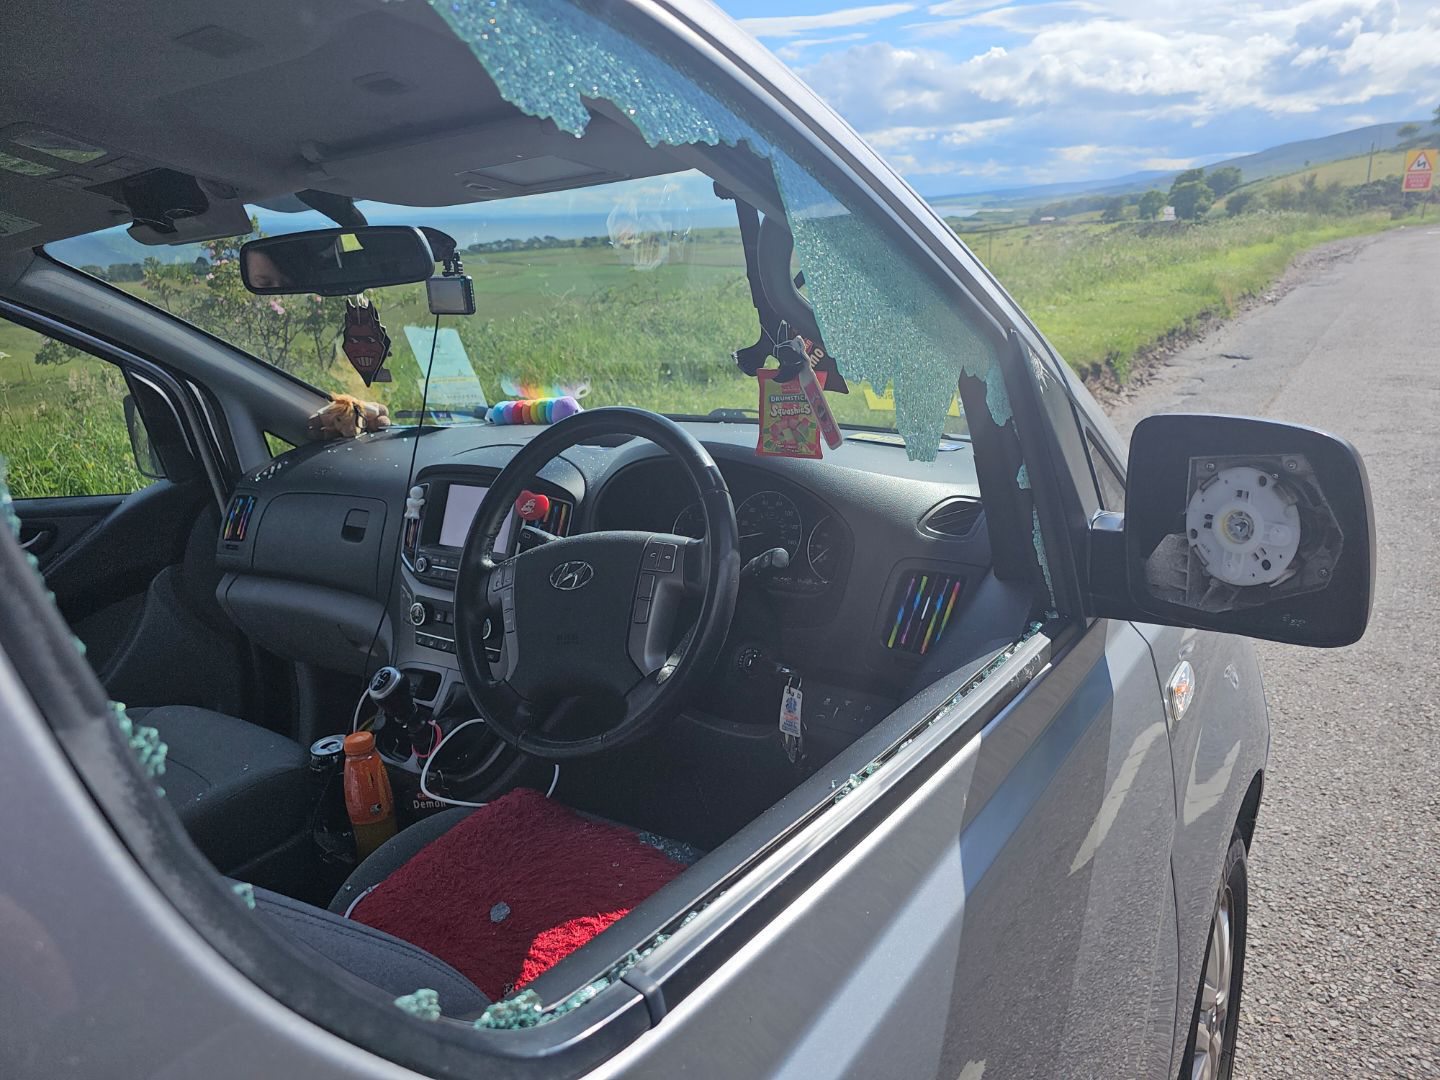 Driver's side window and wing mirror smashed in A9 hit-and-run.